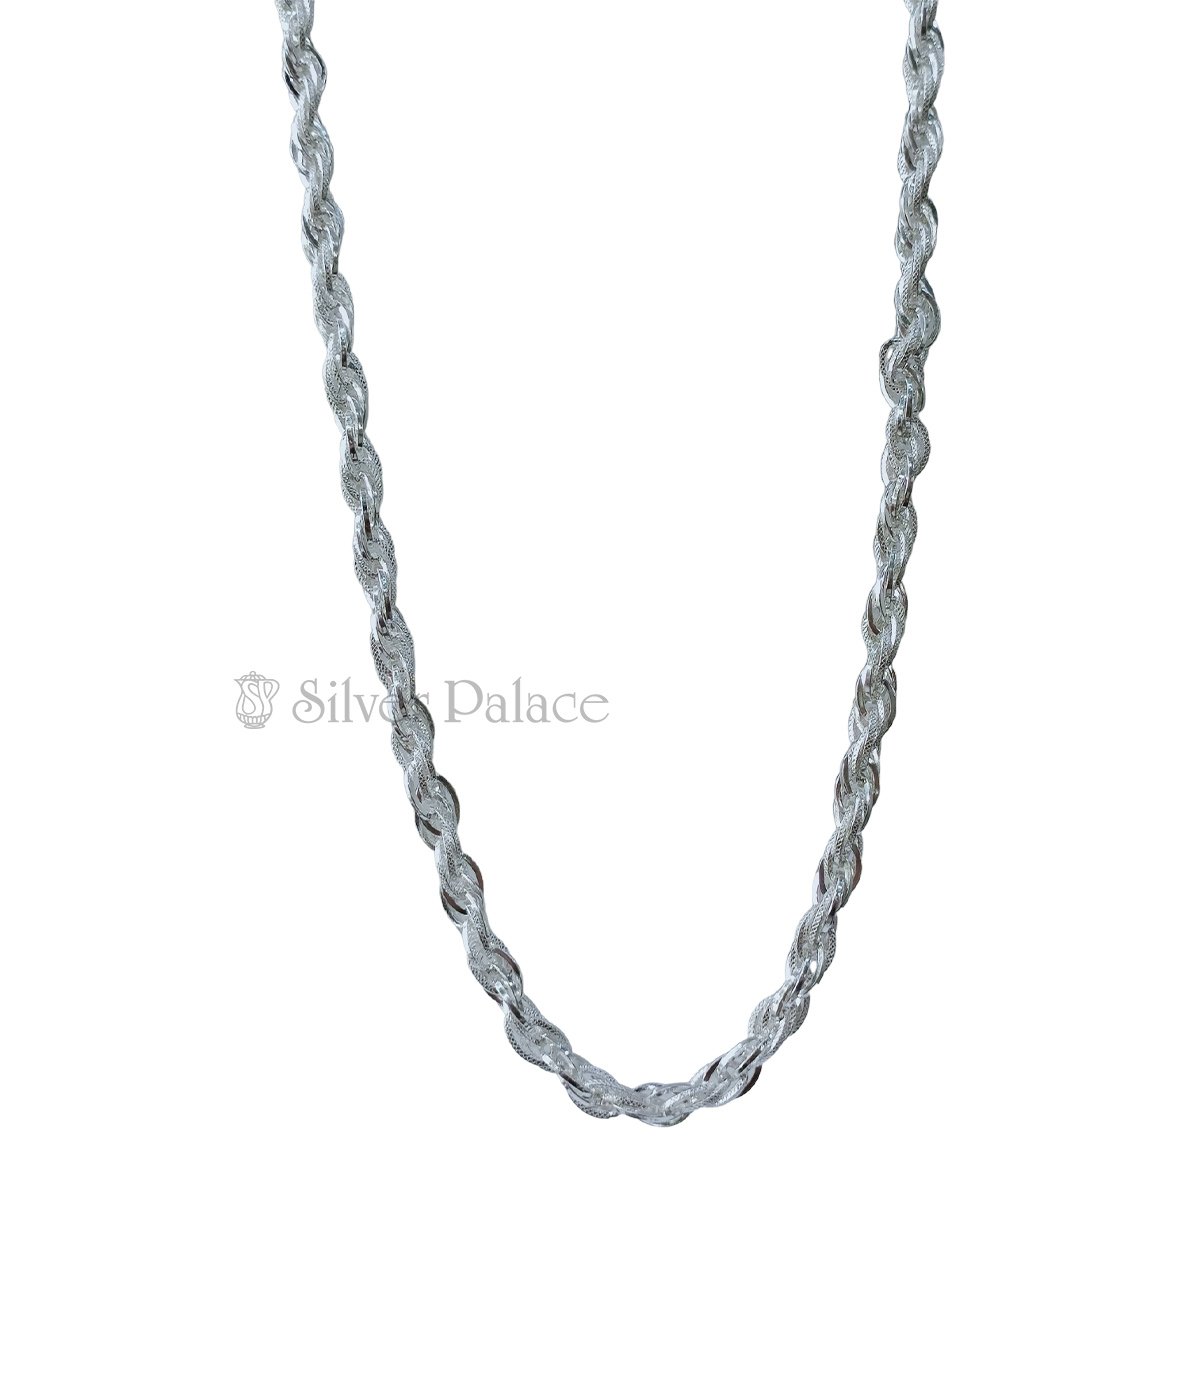 92.5 STERLING SILVER TWISTED LINKED HOLLOW CHAIN 